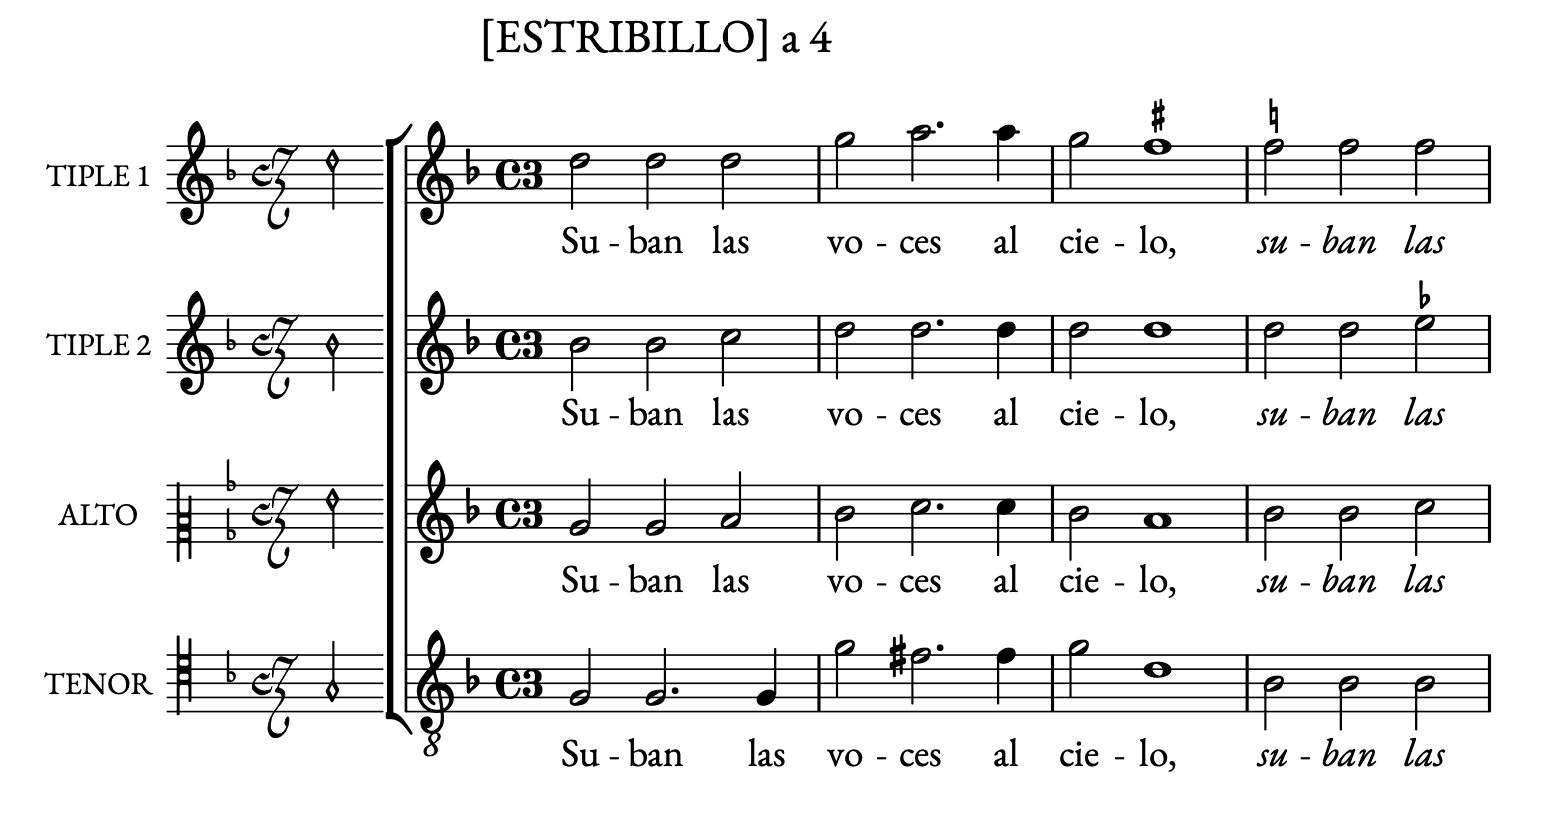 Snippet of music notation produced with the lirio library